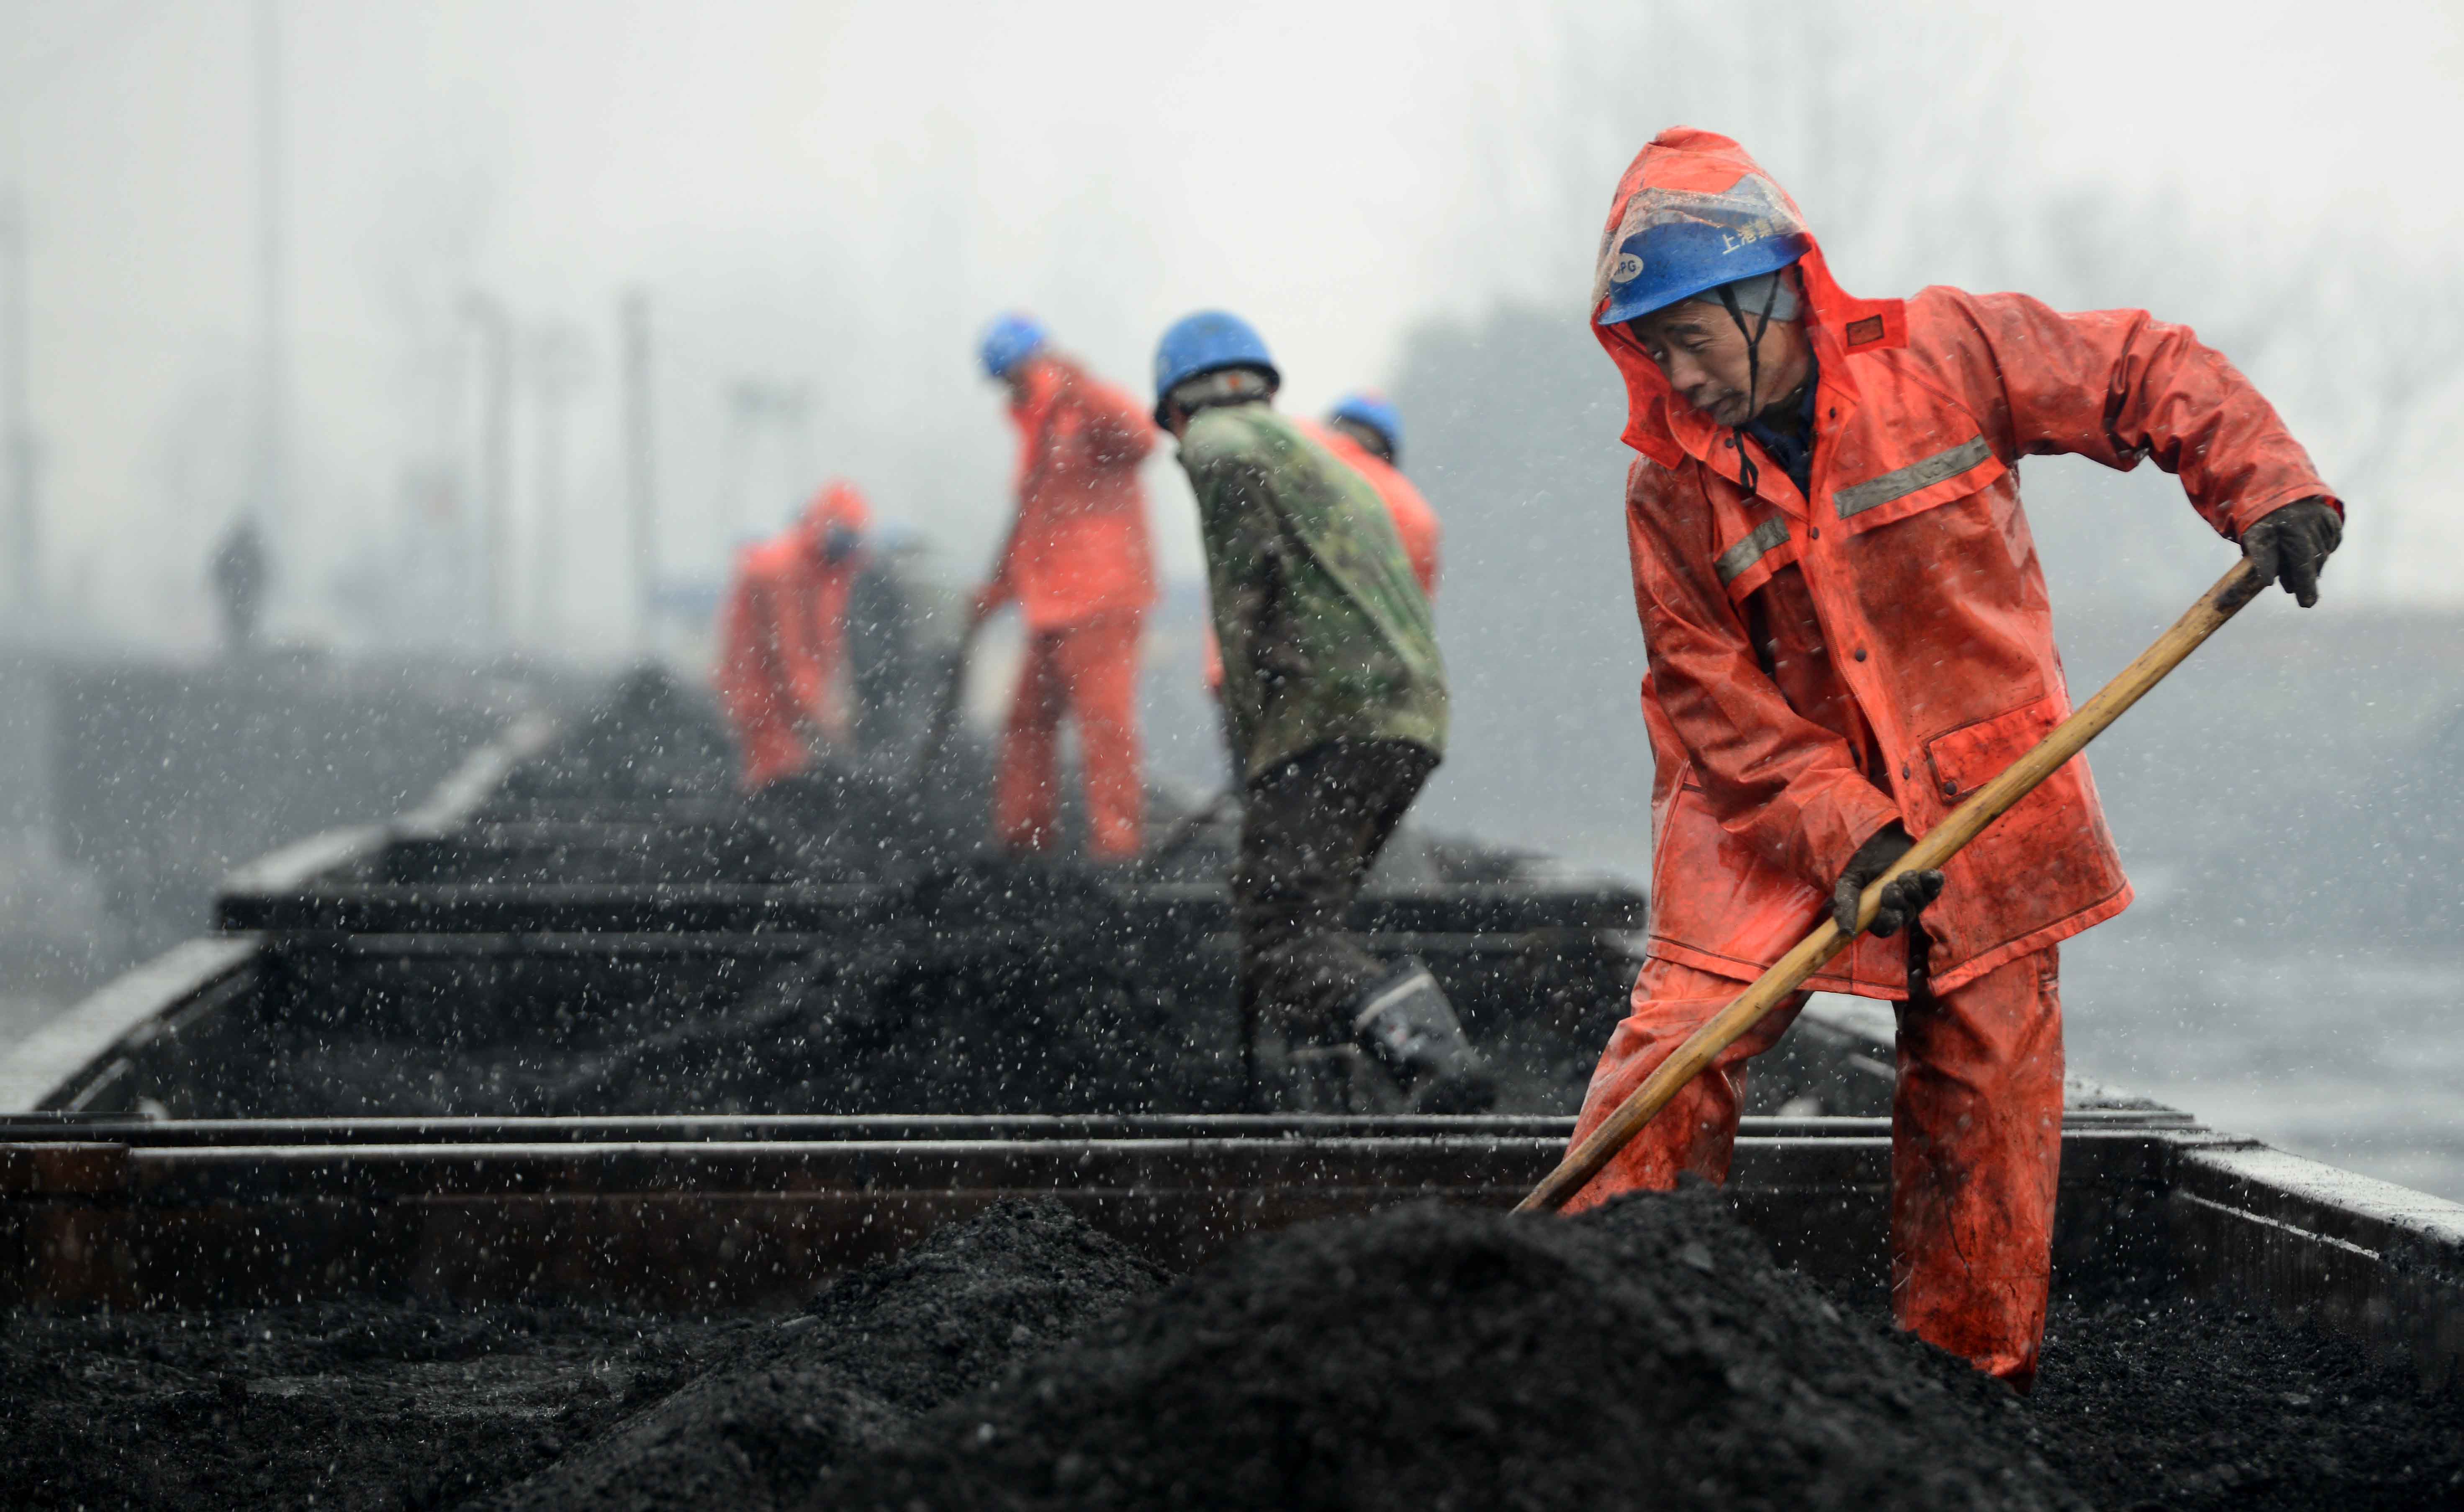 Workers work on the coal carriages at a railway station in China's Jiangxi province.